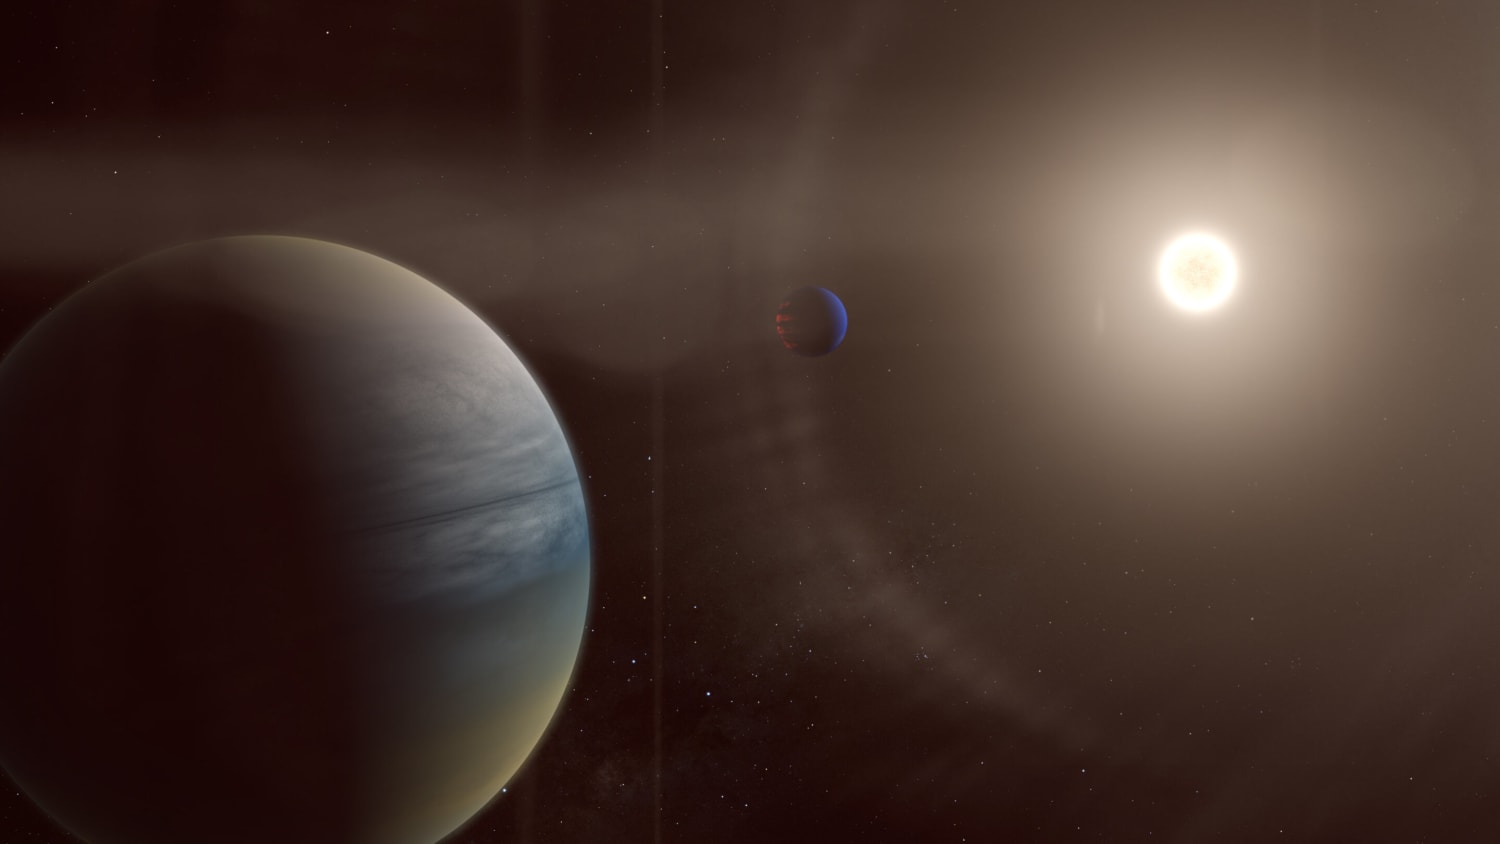 Citizen scientists discover two gaseous planets around a bright, sun-like star